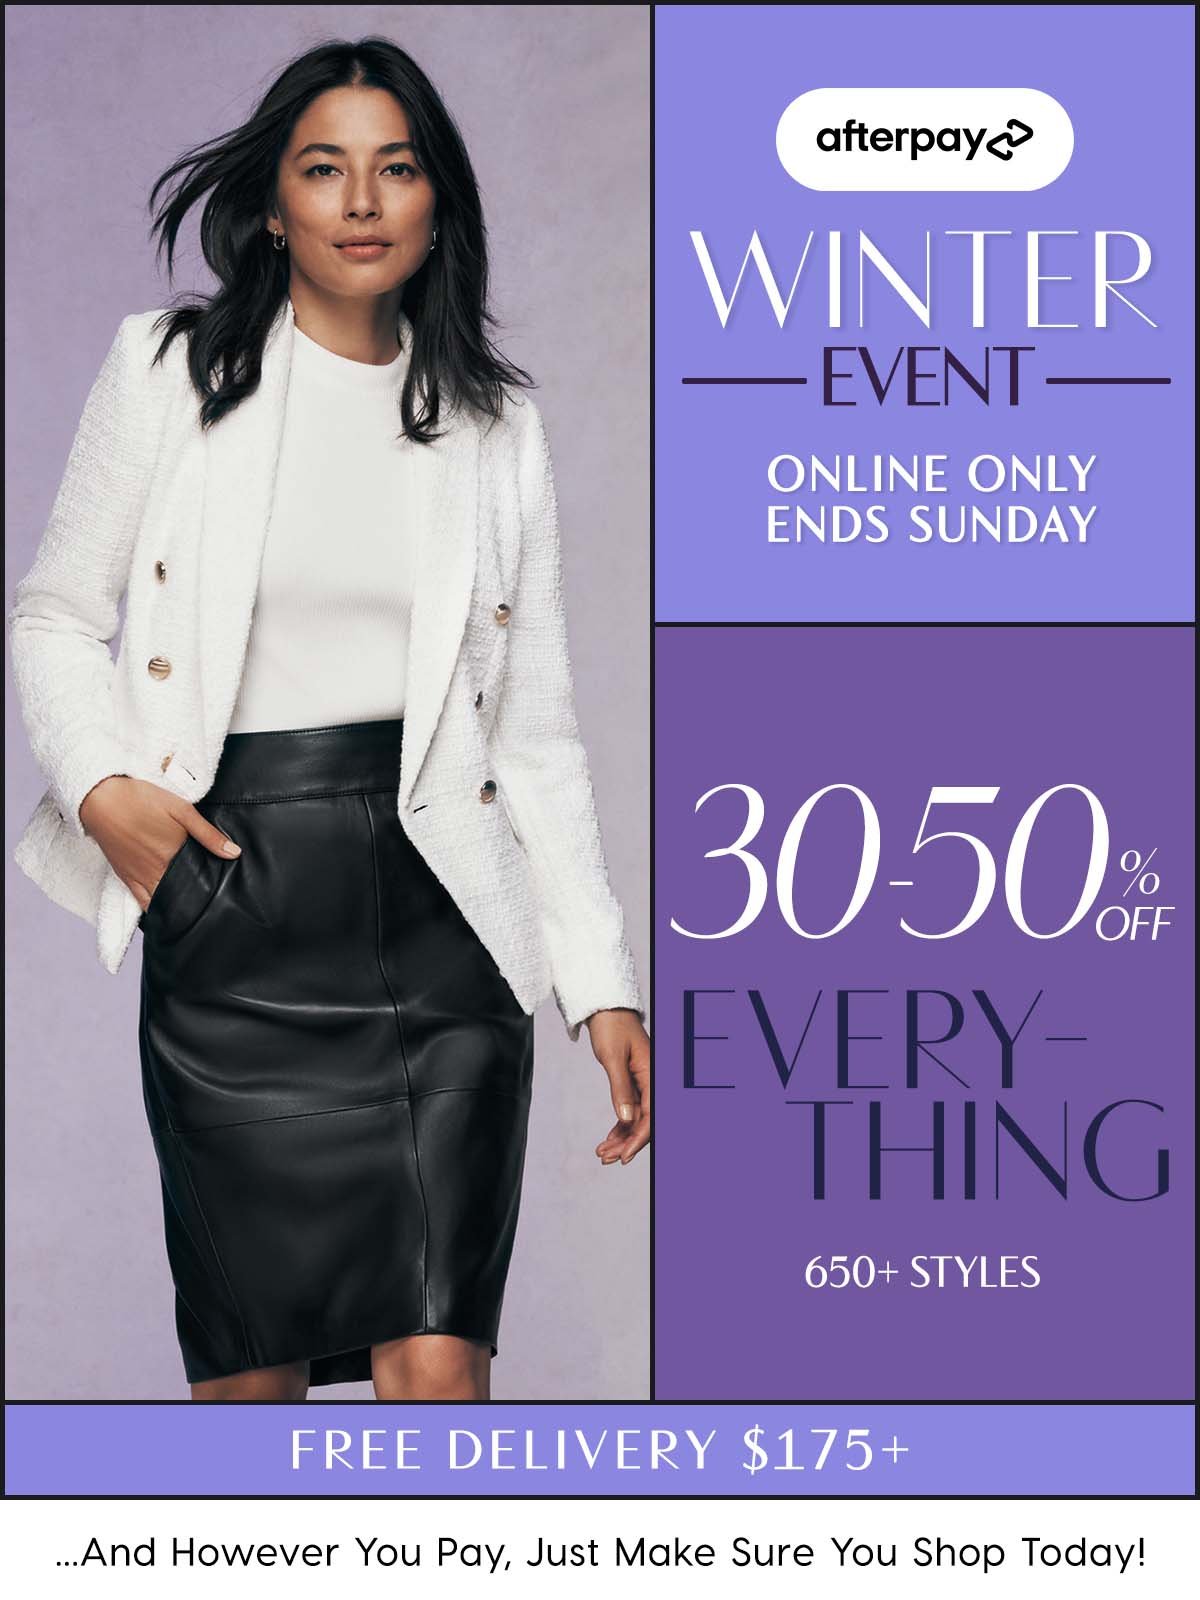 Afterpay Winter Event. Online Only Ends Sunday. 30-50% Off Everything. 650+ Styles. Free Delivery $175+ ...And However You Pay, Just Make Sure You Shop Today!  